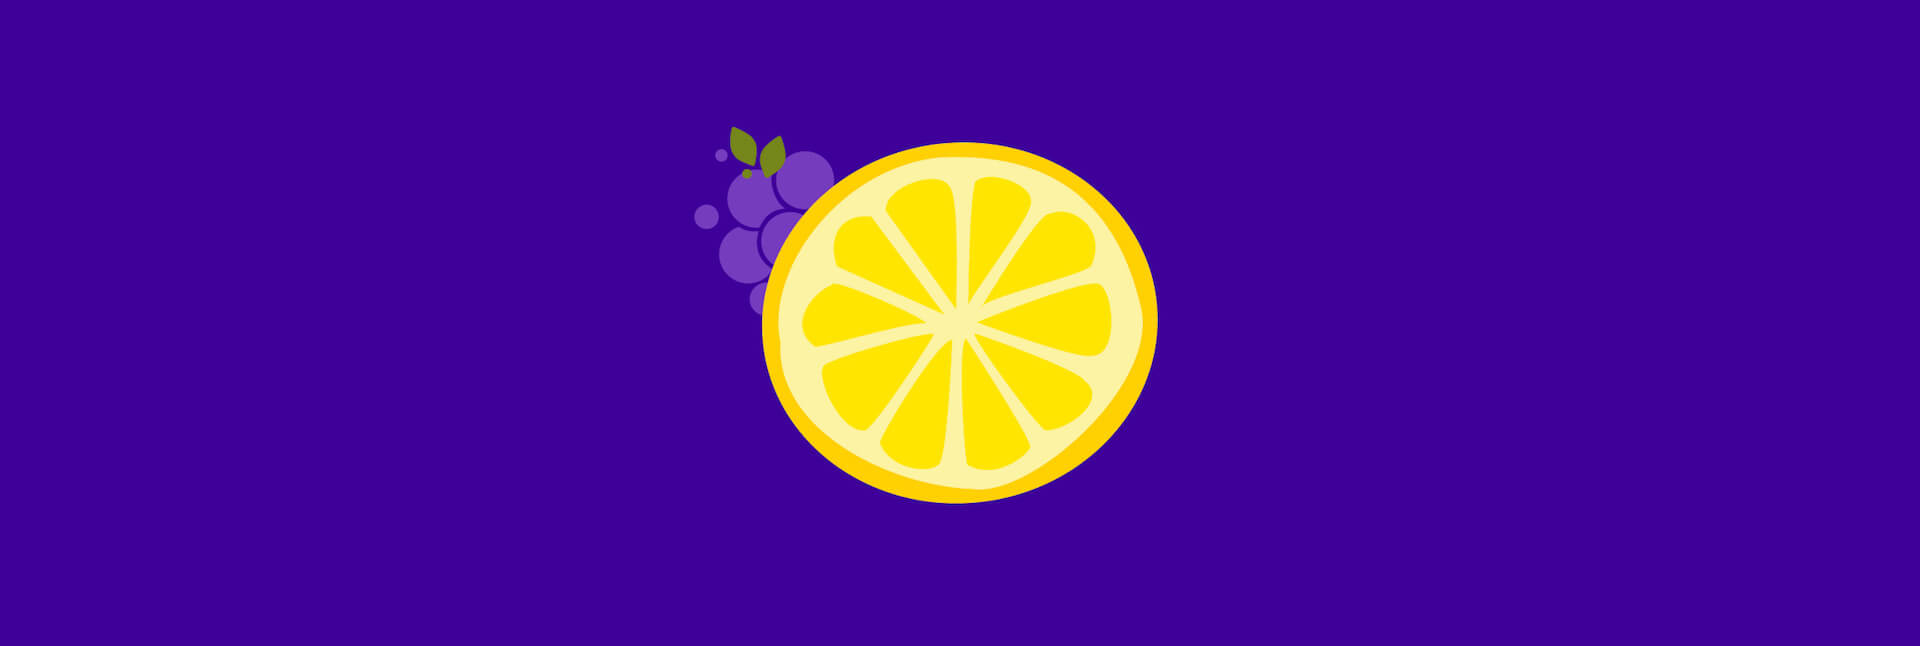 Purple banner with grapes and a lemon